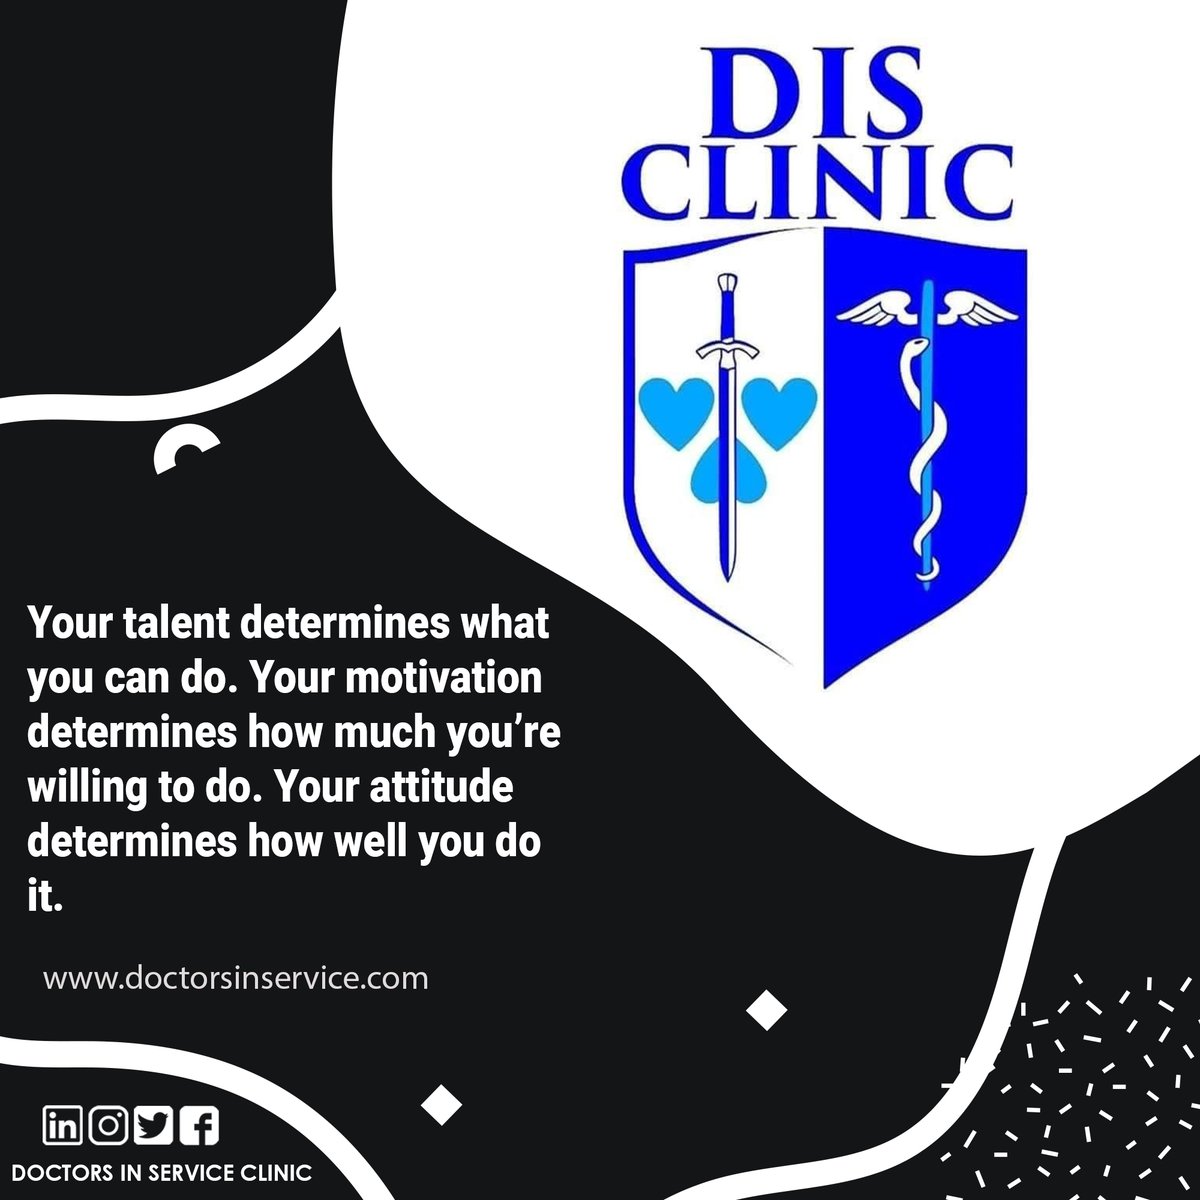 Your talent determines what you can do. #disclinic #mondaymotivation